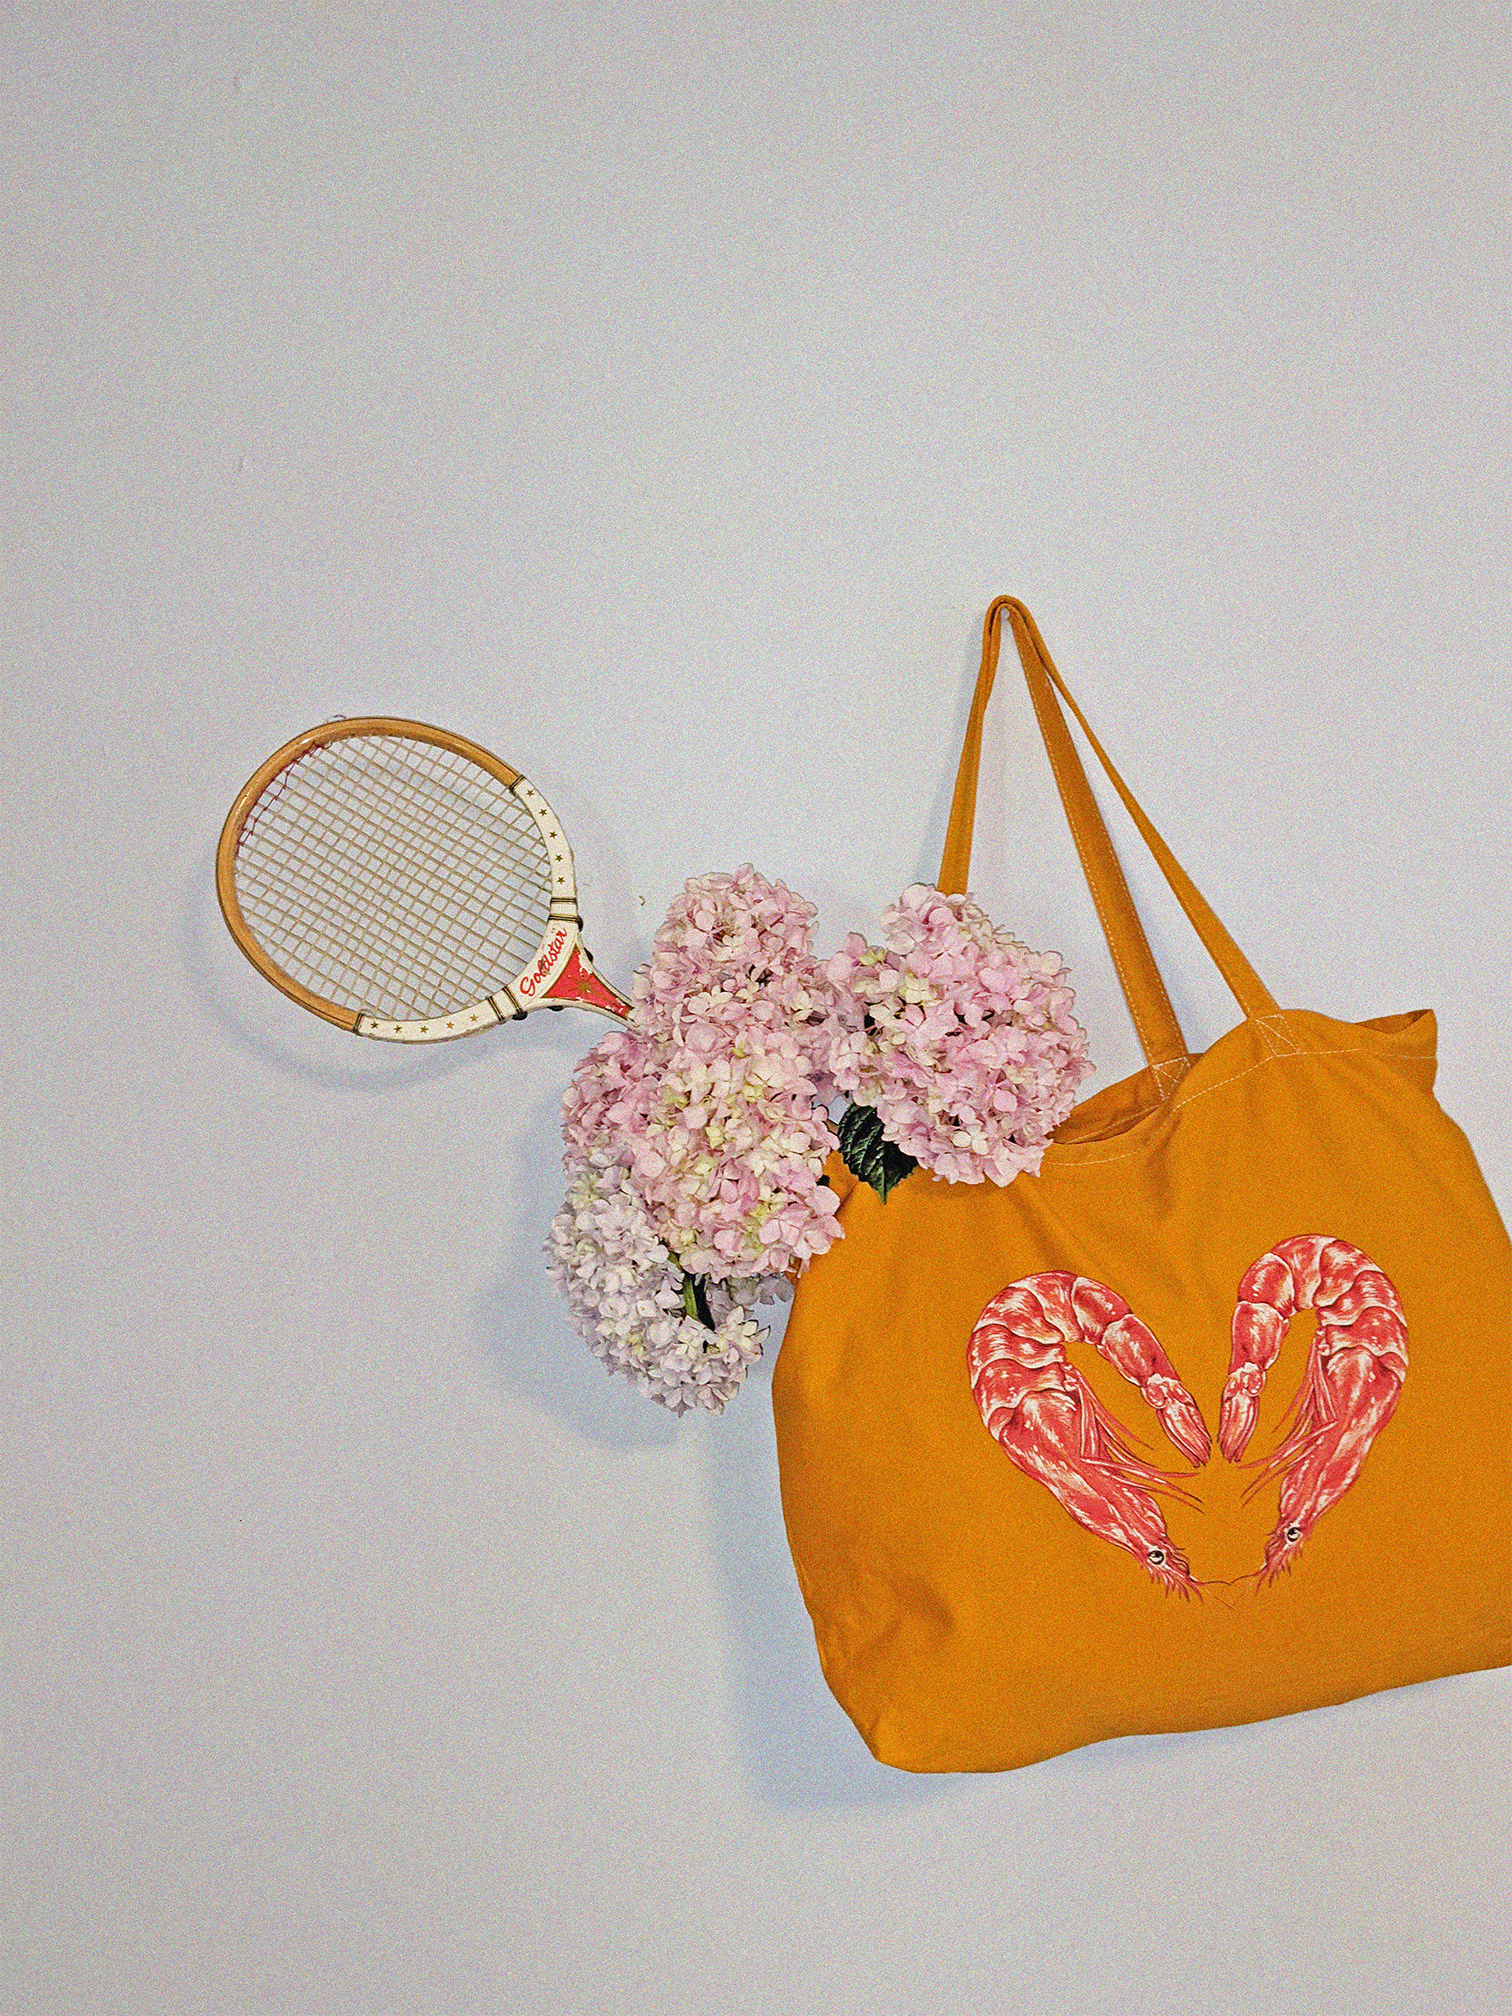 GOLD HEART TOTE